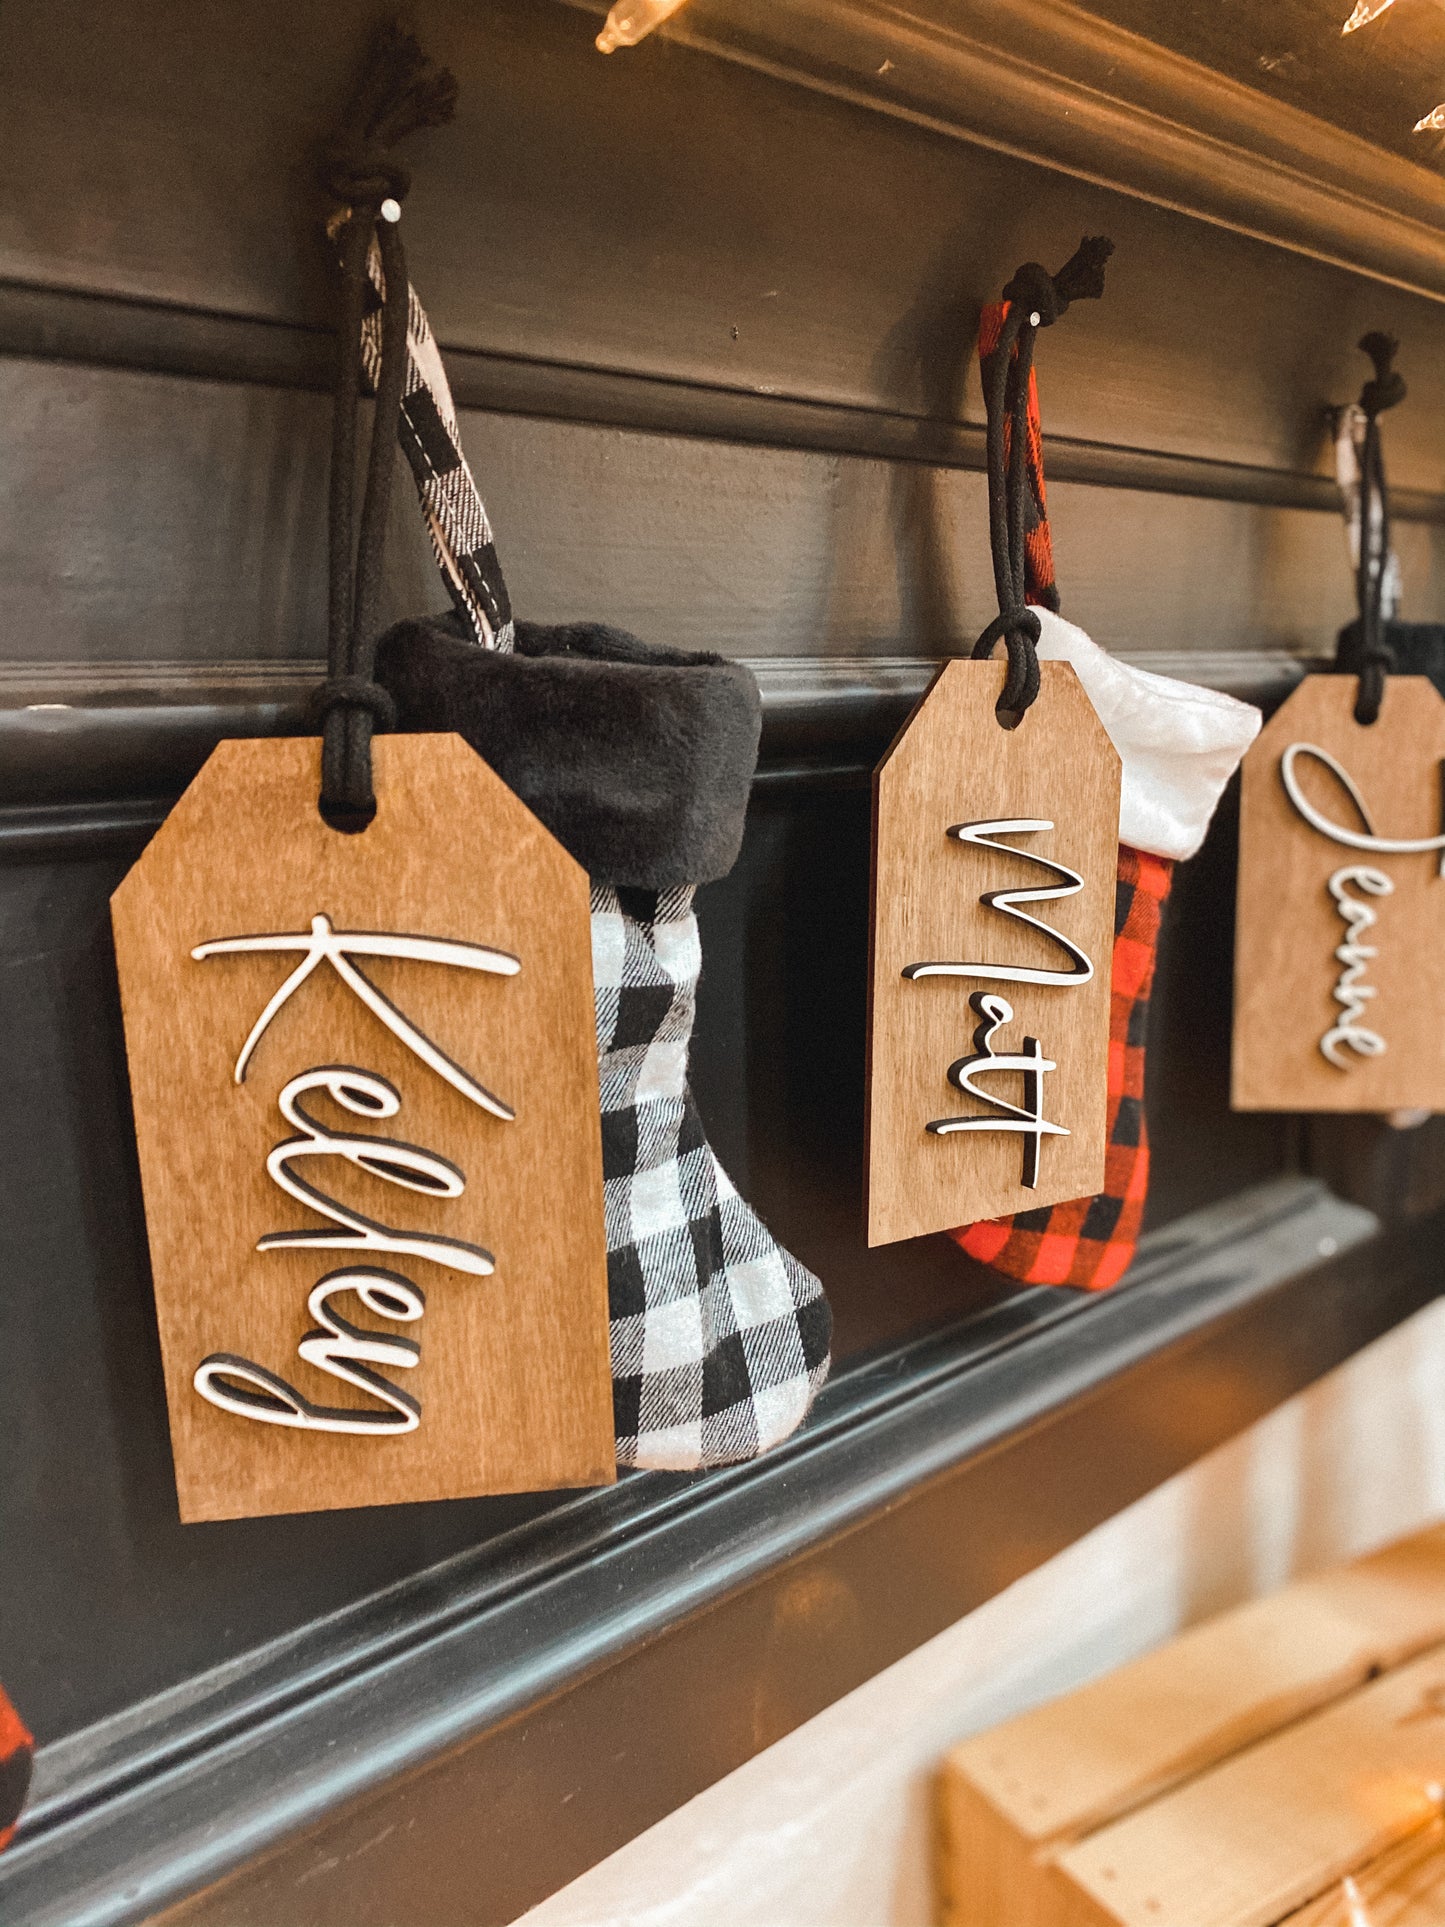 Wooden Stocking Tags